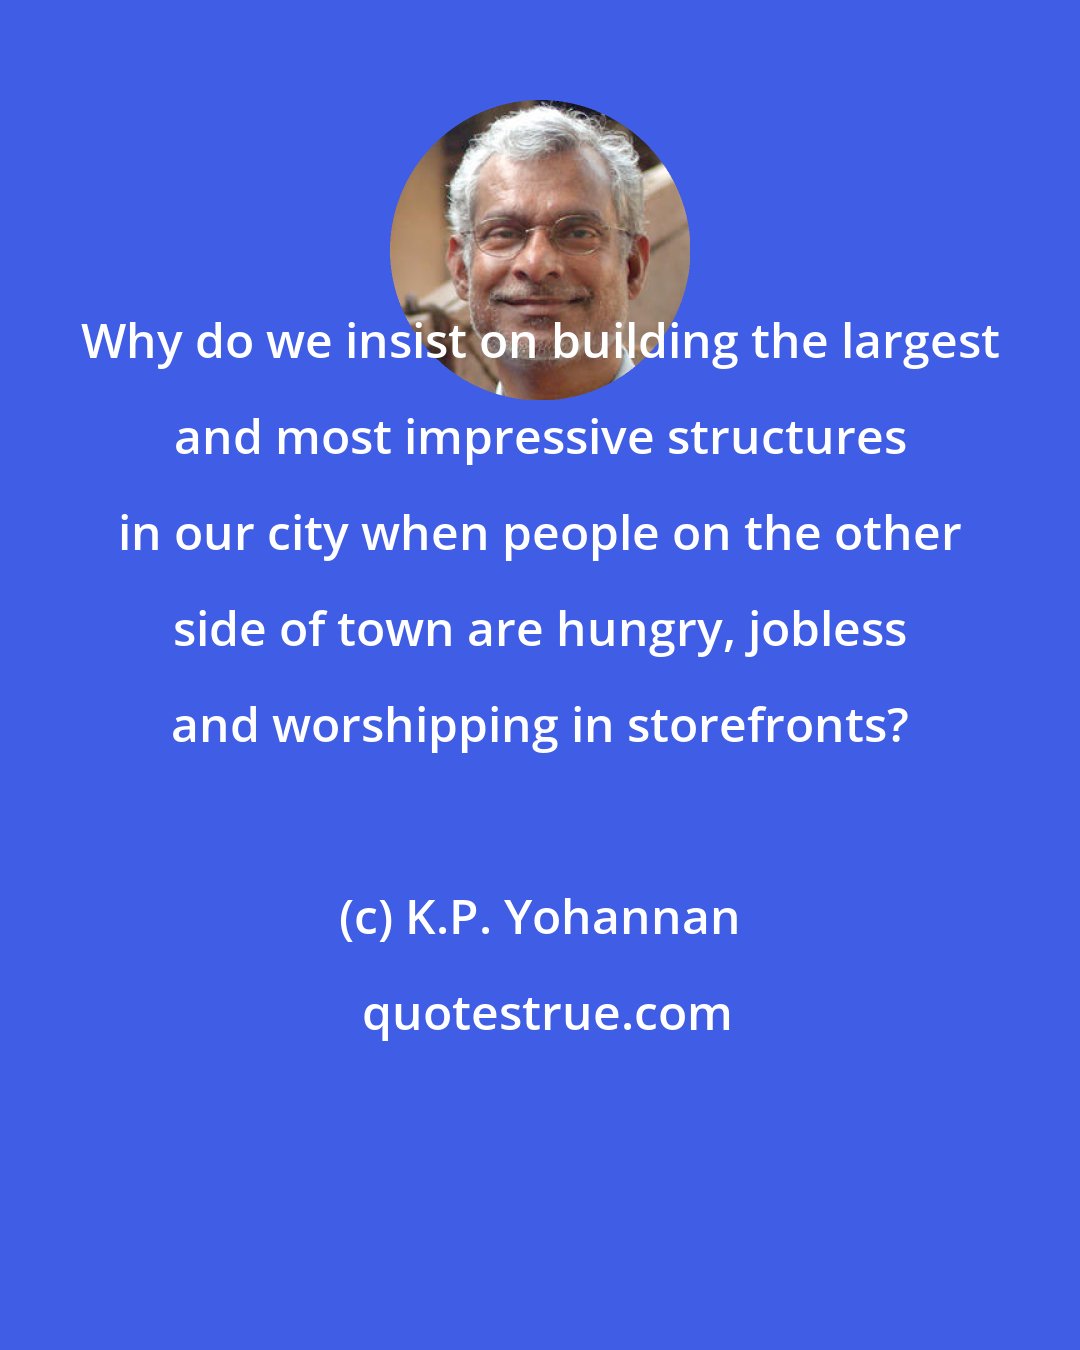 K.P. Yohannan: Why do we insist on building the largest and most impressive structures in our city when people on the other side of town are hungry, jobless and worshipping in storefronts?